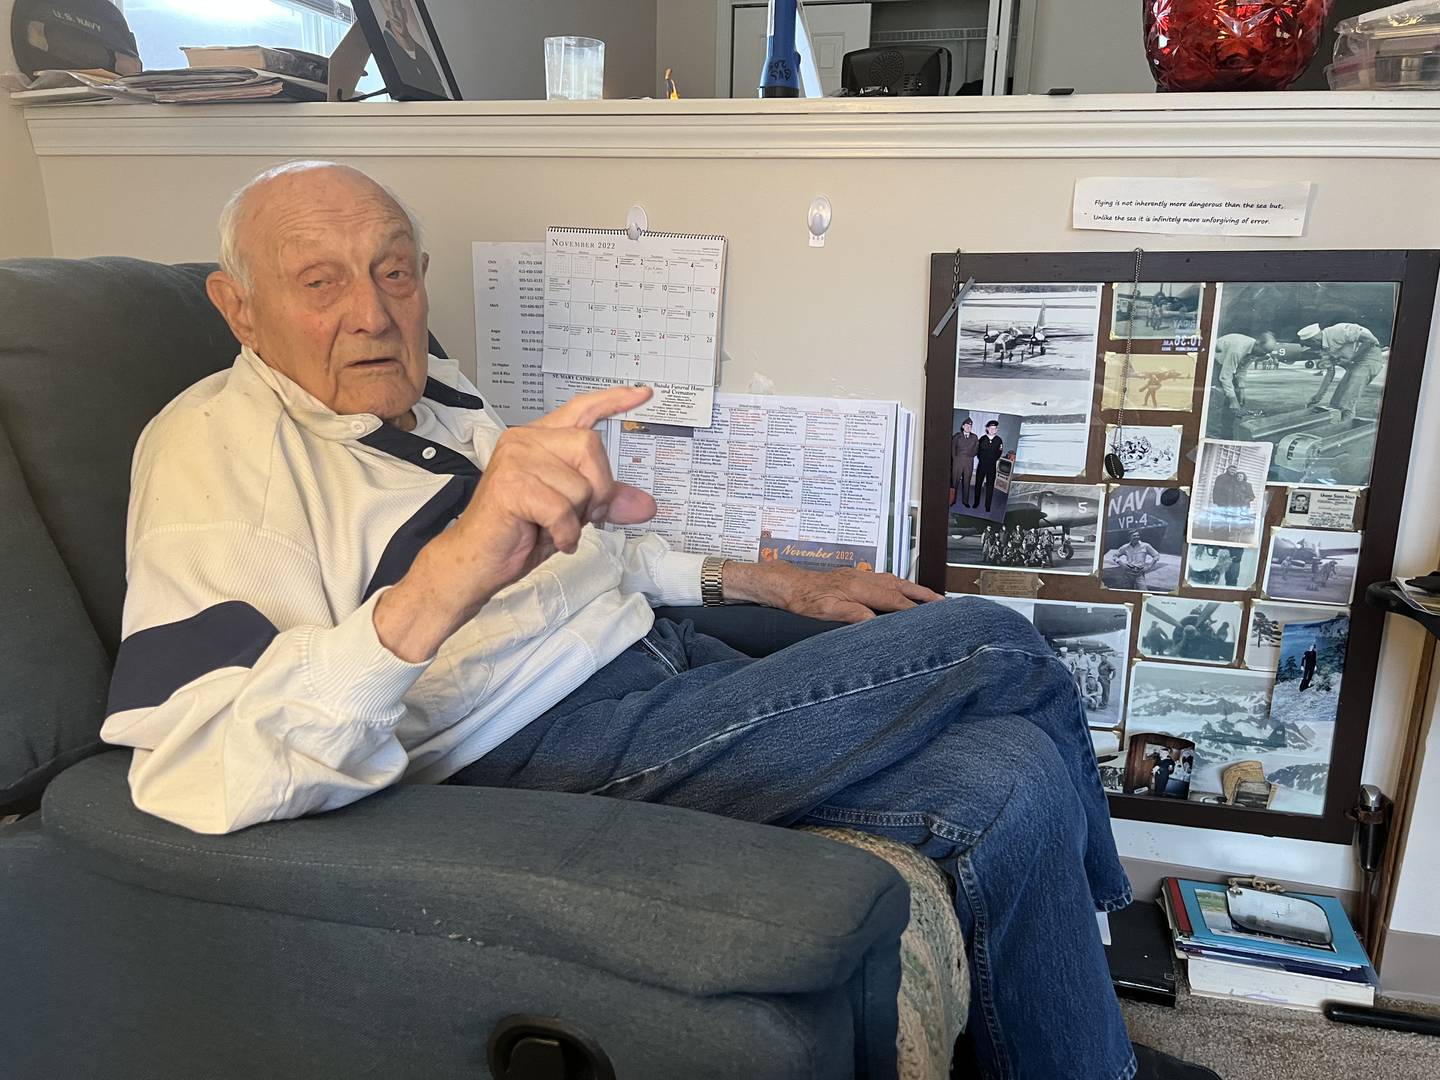 Richard Korleski, a veteran of the Korean War, shows his collage of memorabilia from his time in the armed forces seven decades ago.